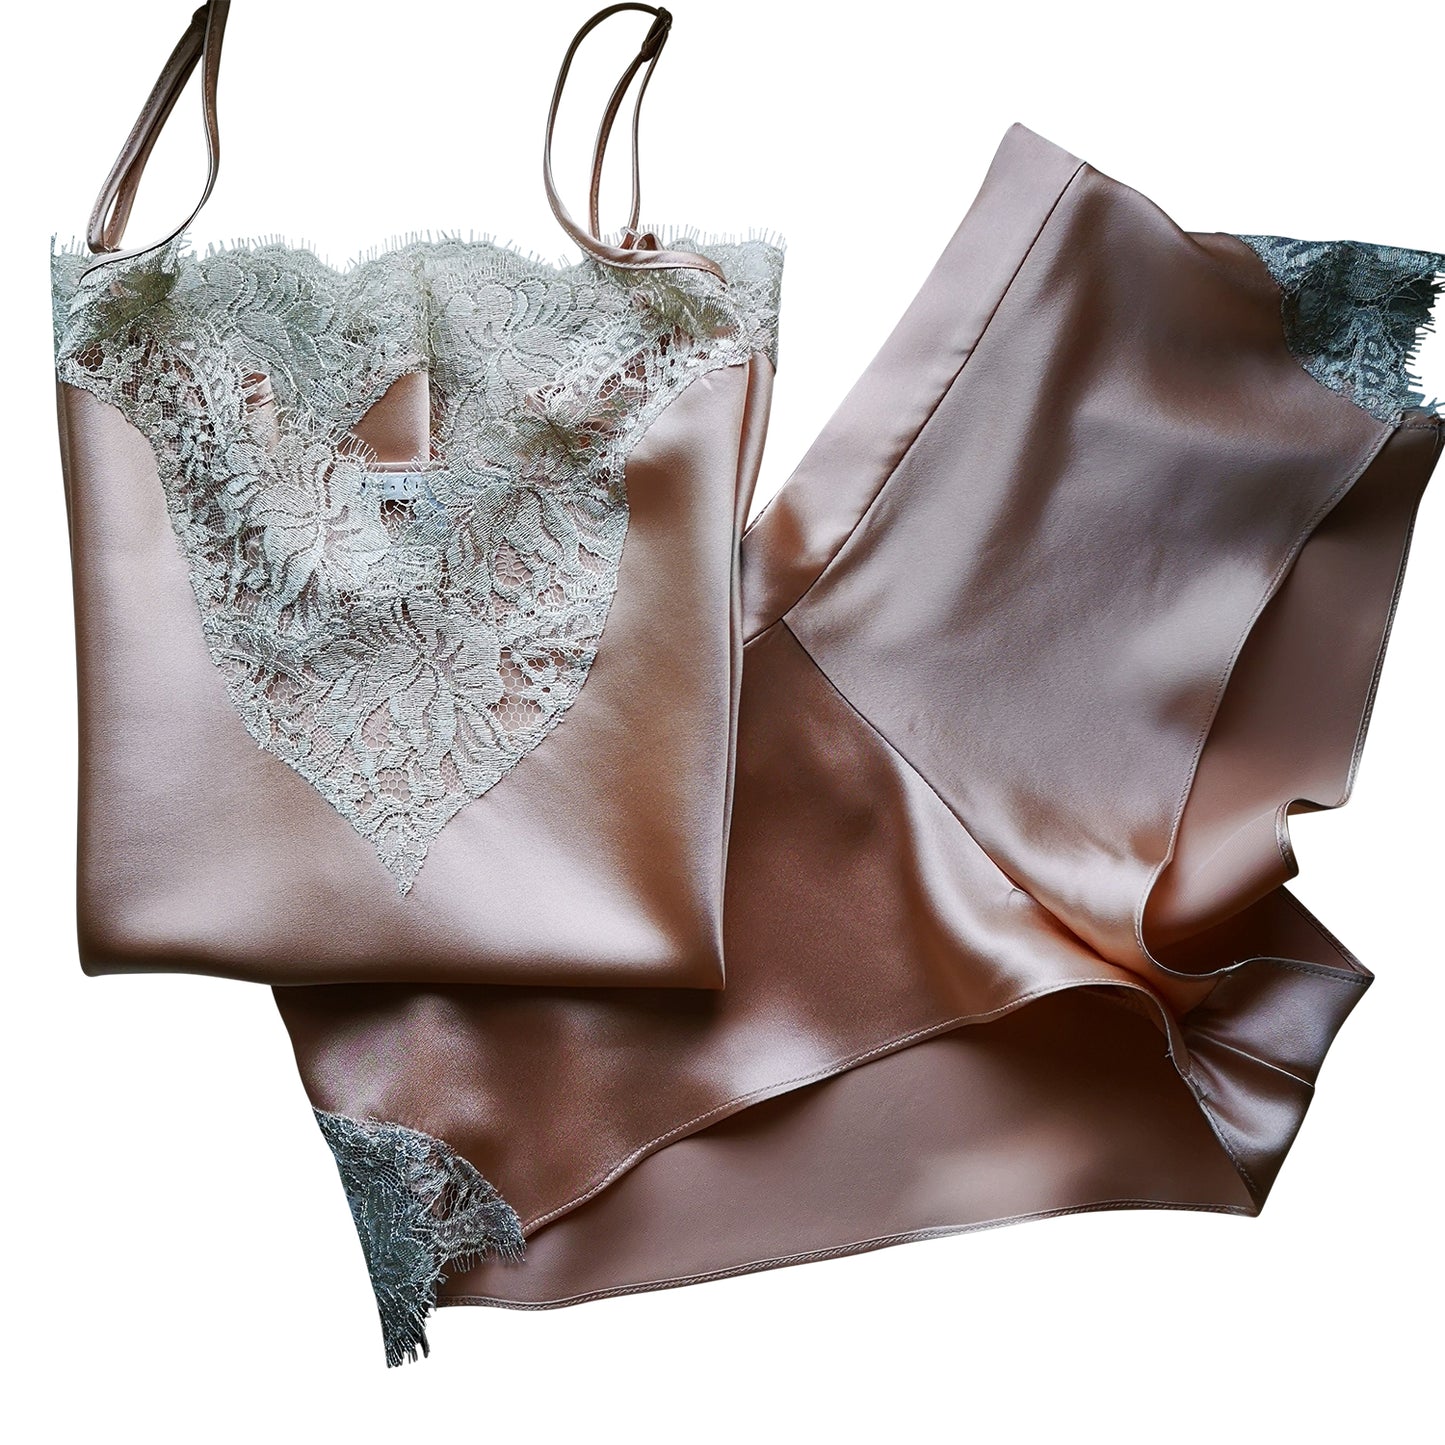 Silk French knickers with French lace - Nude w/ Platinum Lace